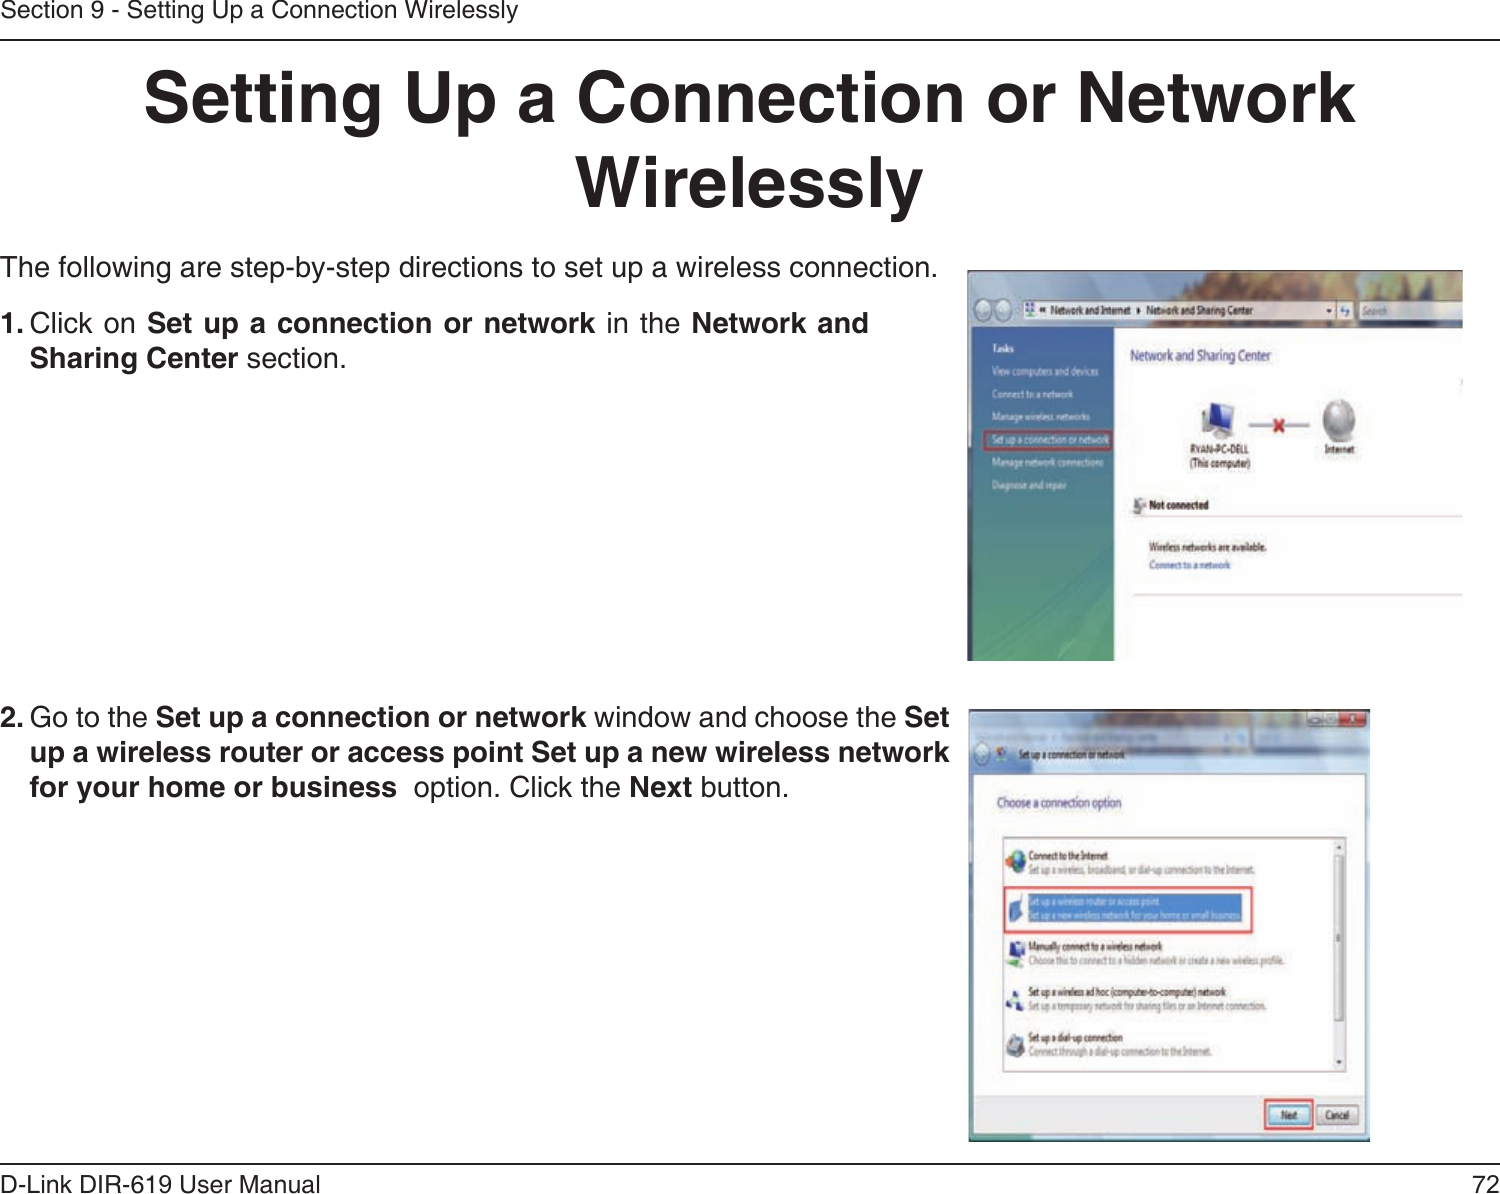 72D-Link DIR-619 User ManualSection 9 - Setting Up a Connection WirelesslySetting Up a Connection or Network WirelesslyThe following are step-by-step directions to set up a wireless connection.2. Go to the Set up a connection or network window and choose the Set up a wireless router or access point Set up a new wireless network for your home or business  option. Click the Next button. 1. Click on Set up a connection or network in the Network and Sharing Center section. 